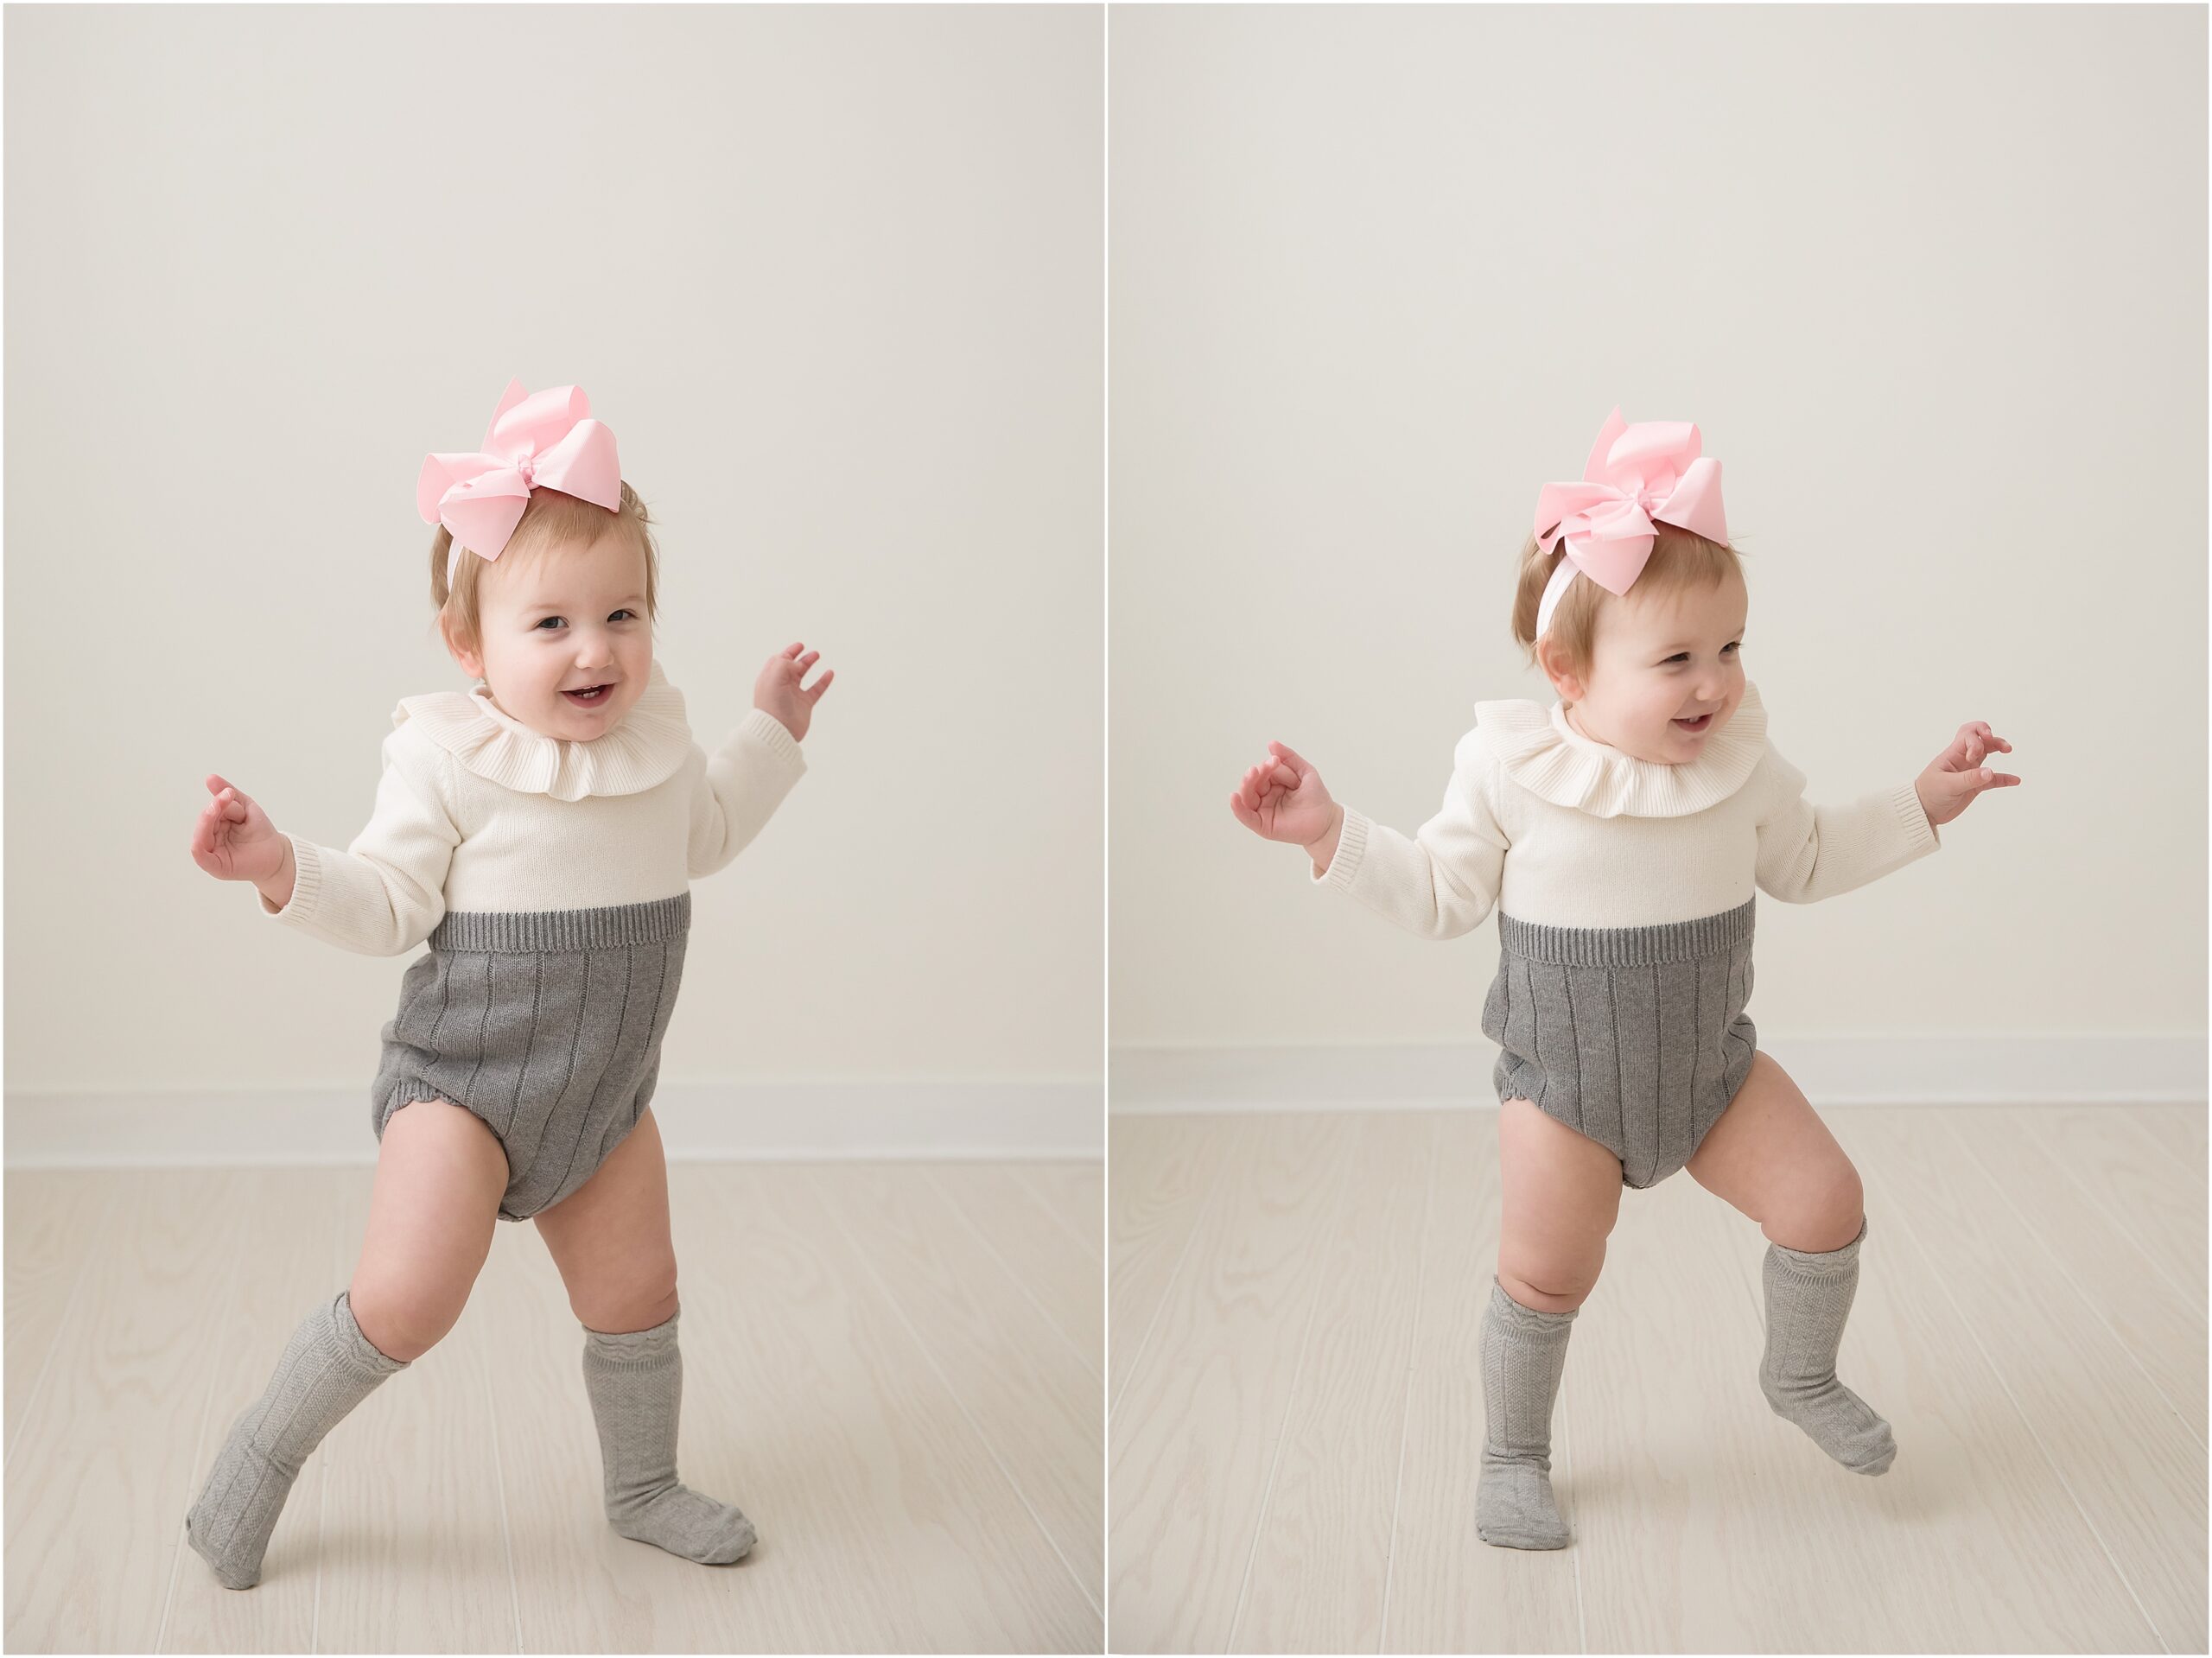 Collage of two photos of a cute one year old baby girl practicing walking while wearing a gray and white outfit and a pink bow.